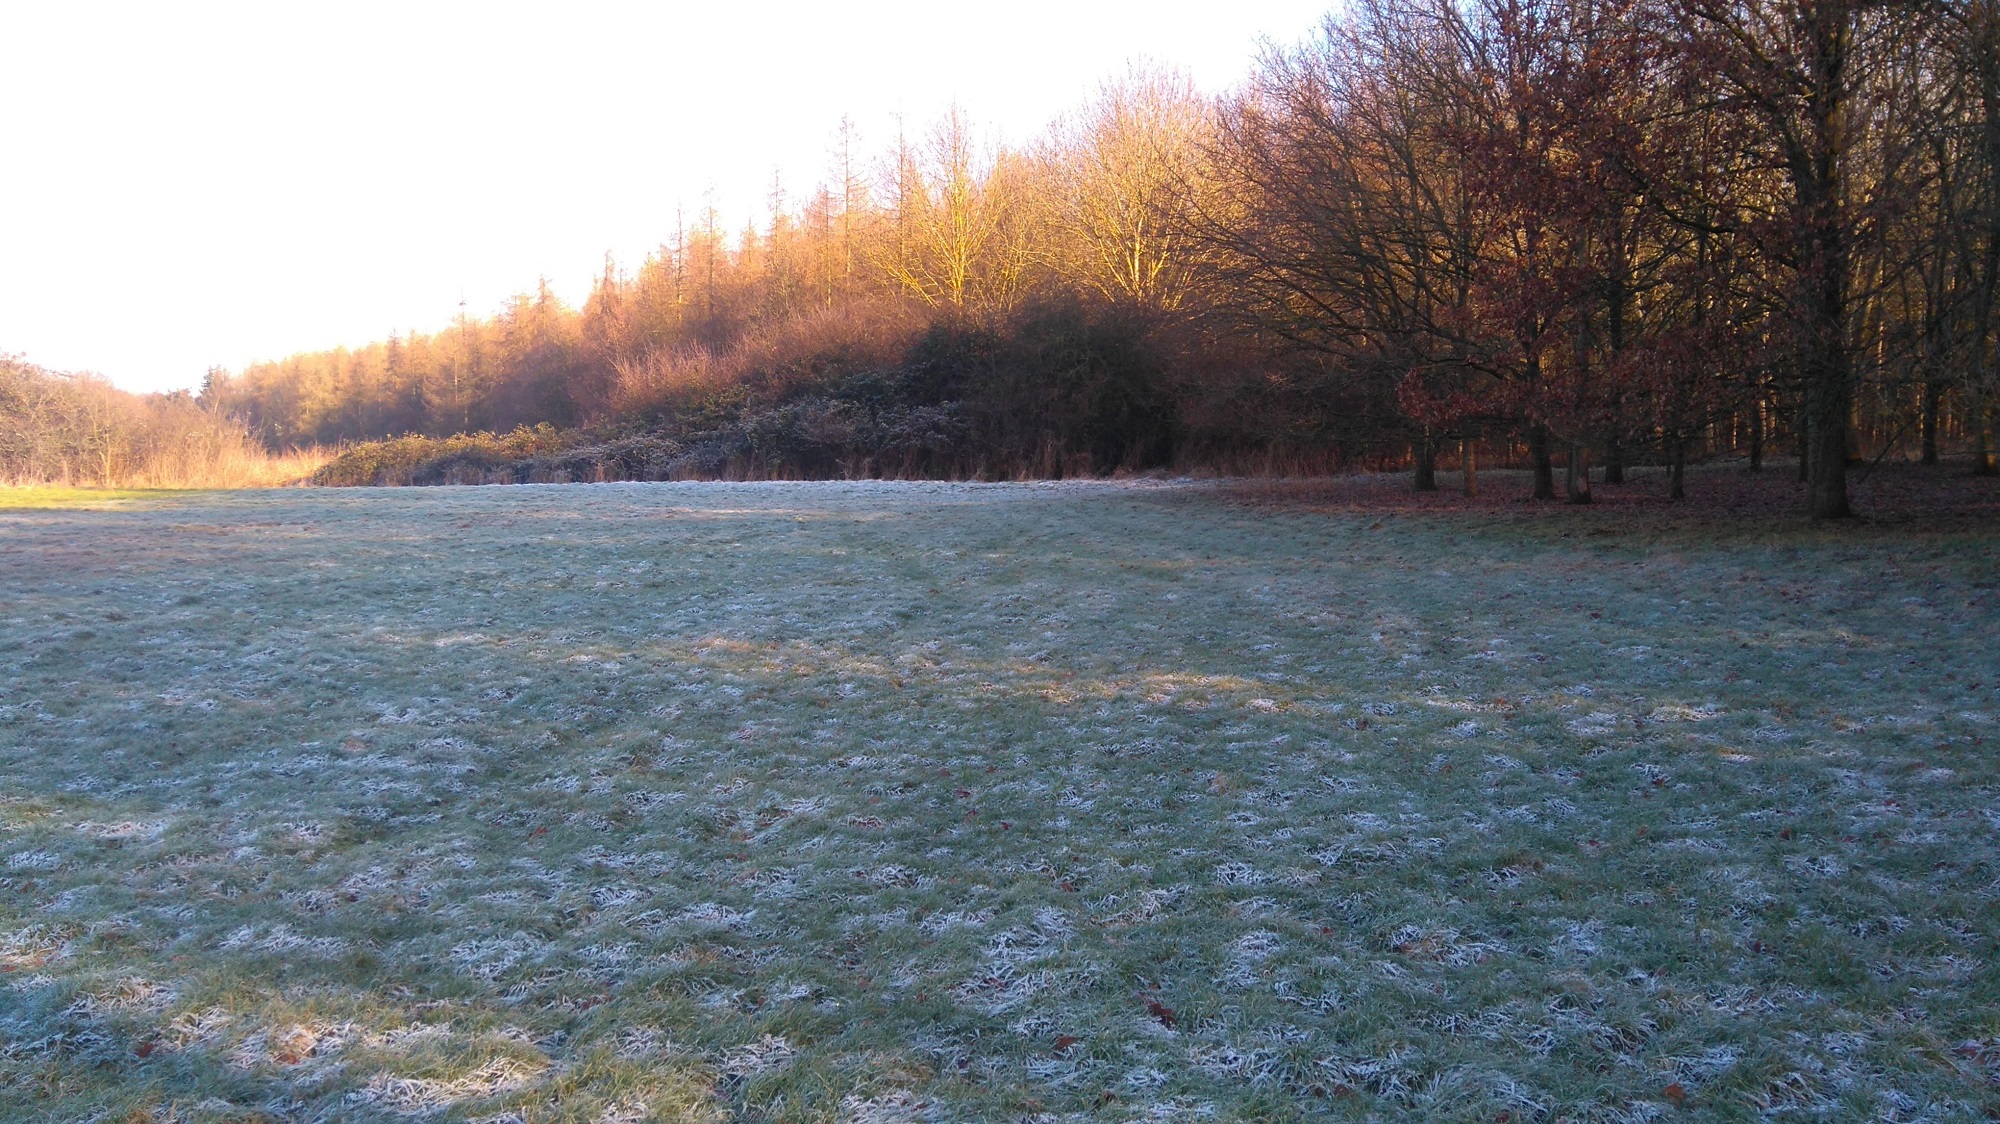 Field in shade covered in frost on a sunny winter day. Trees to the right block the sunlight that hits the tree line in the distance.